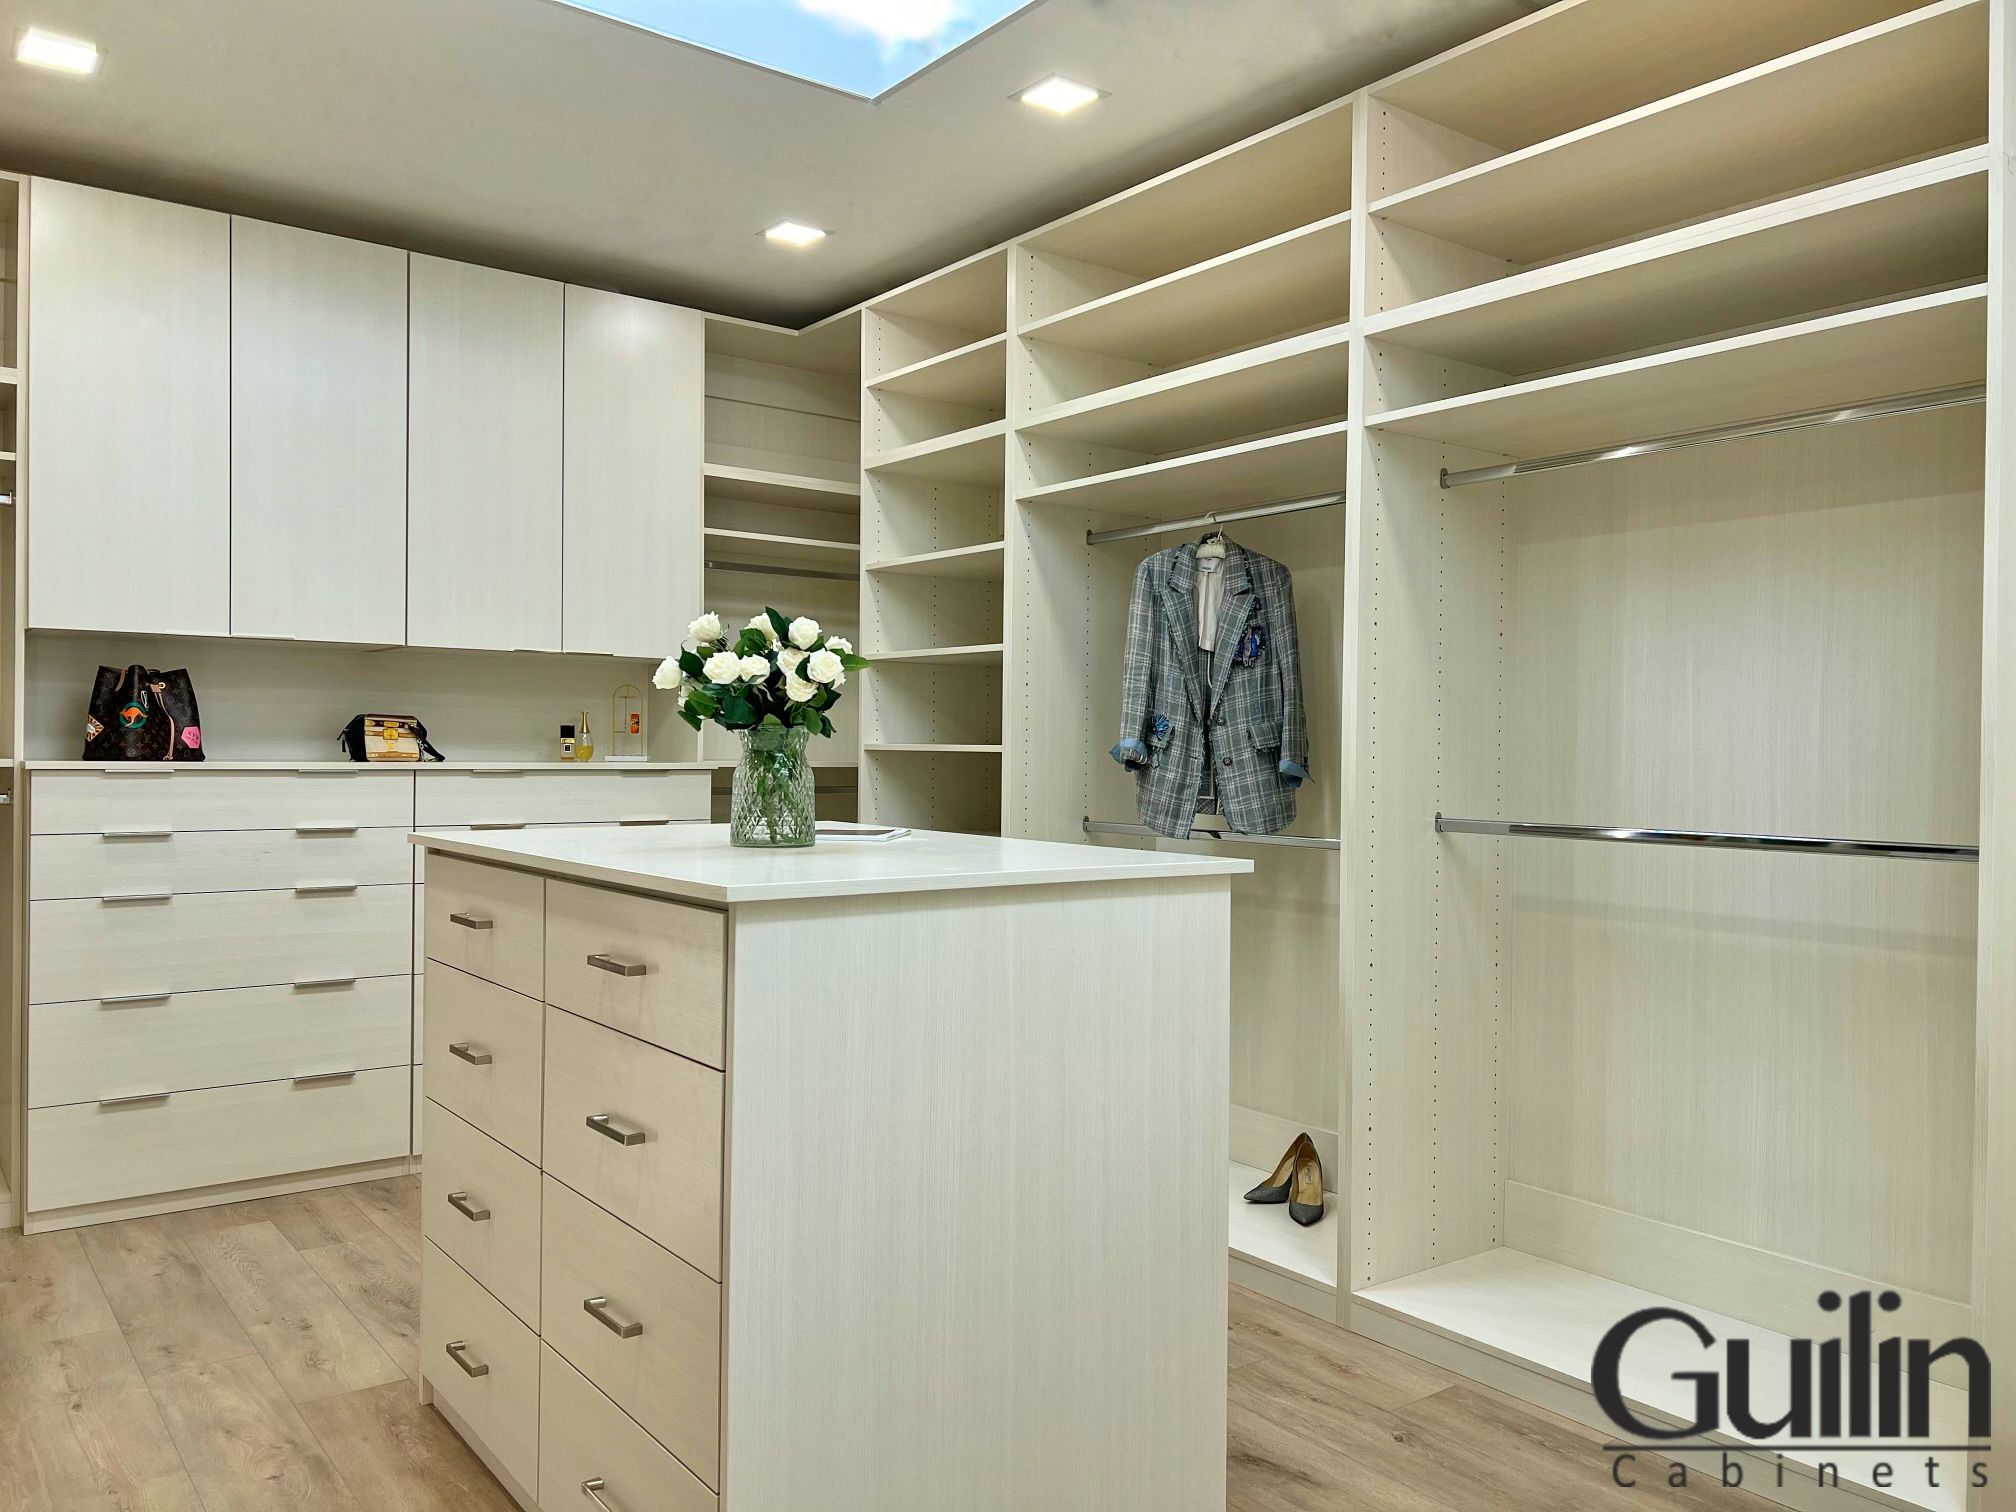 The big advantage of custom closets is their ability to create an illusion of more space